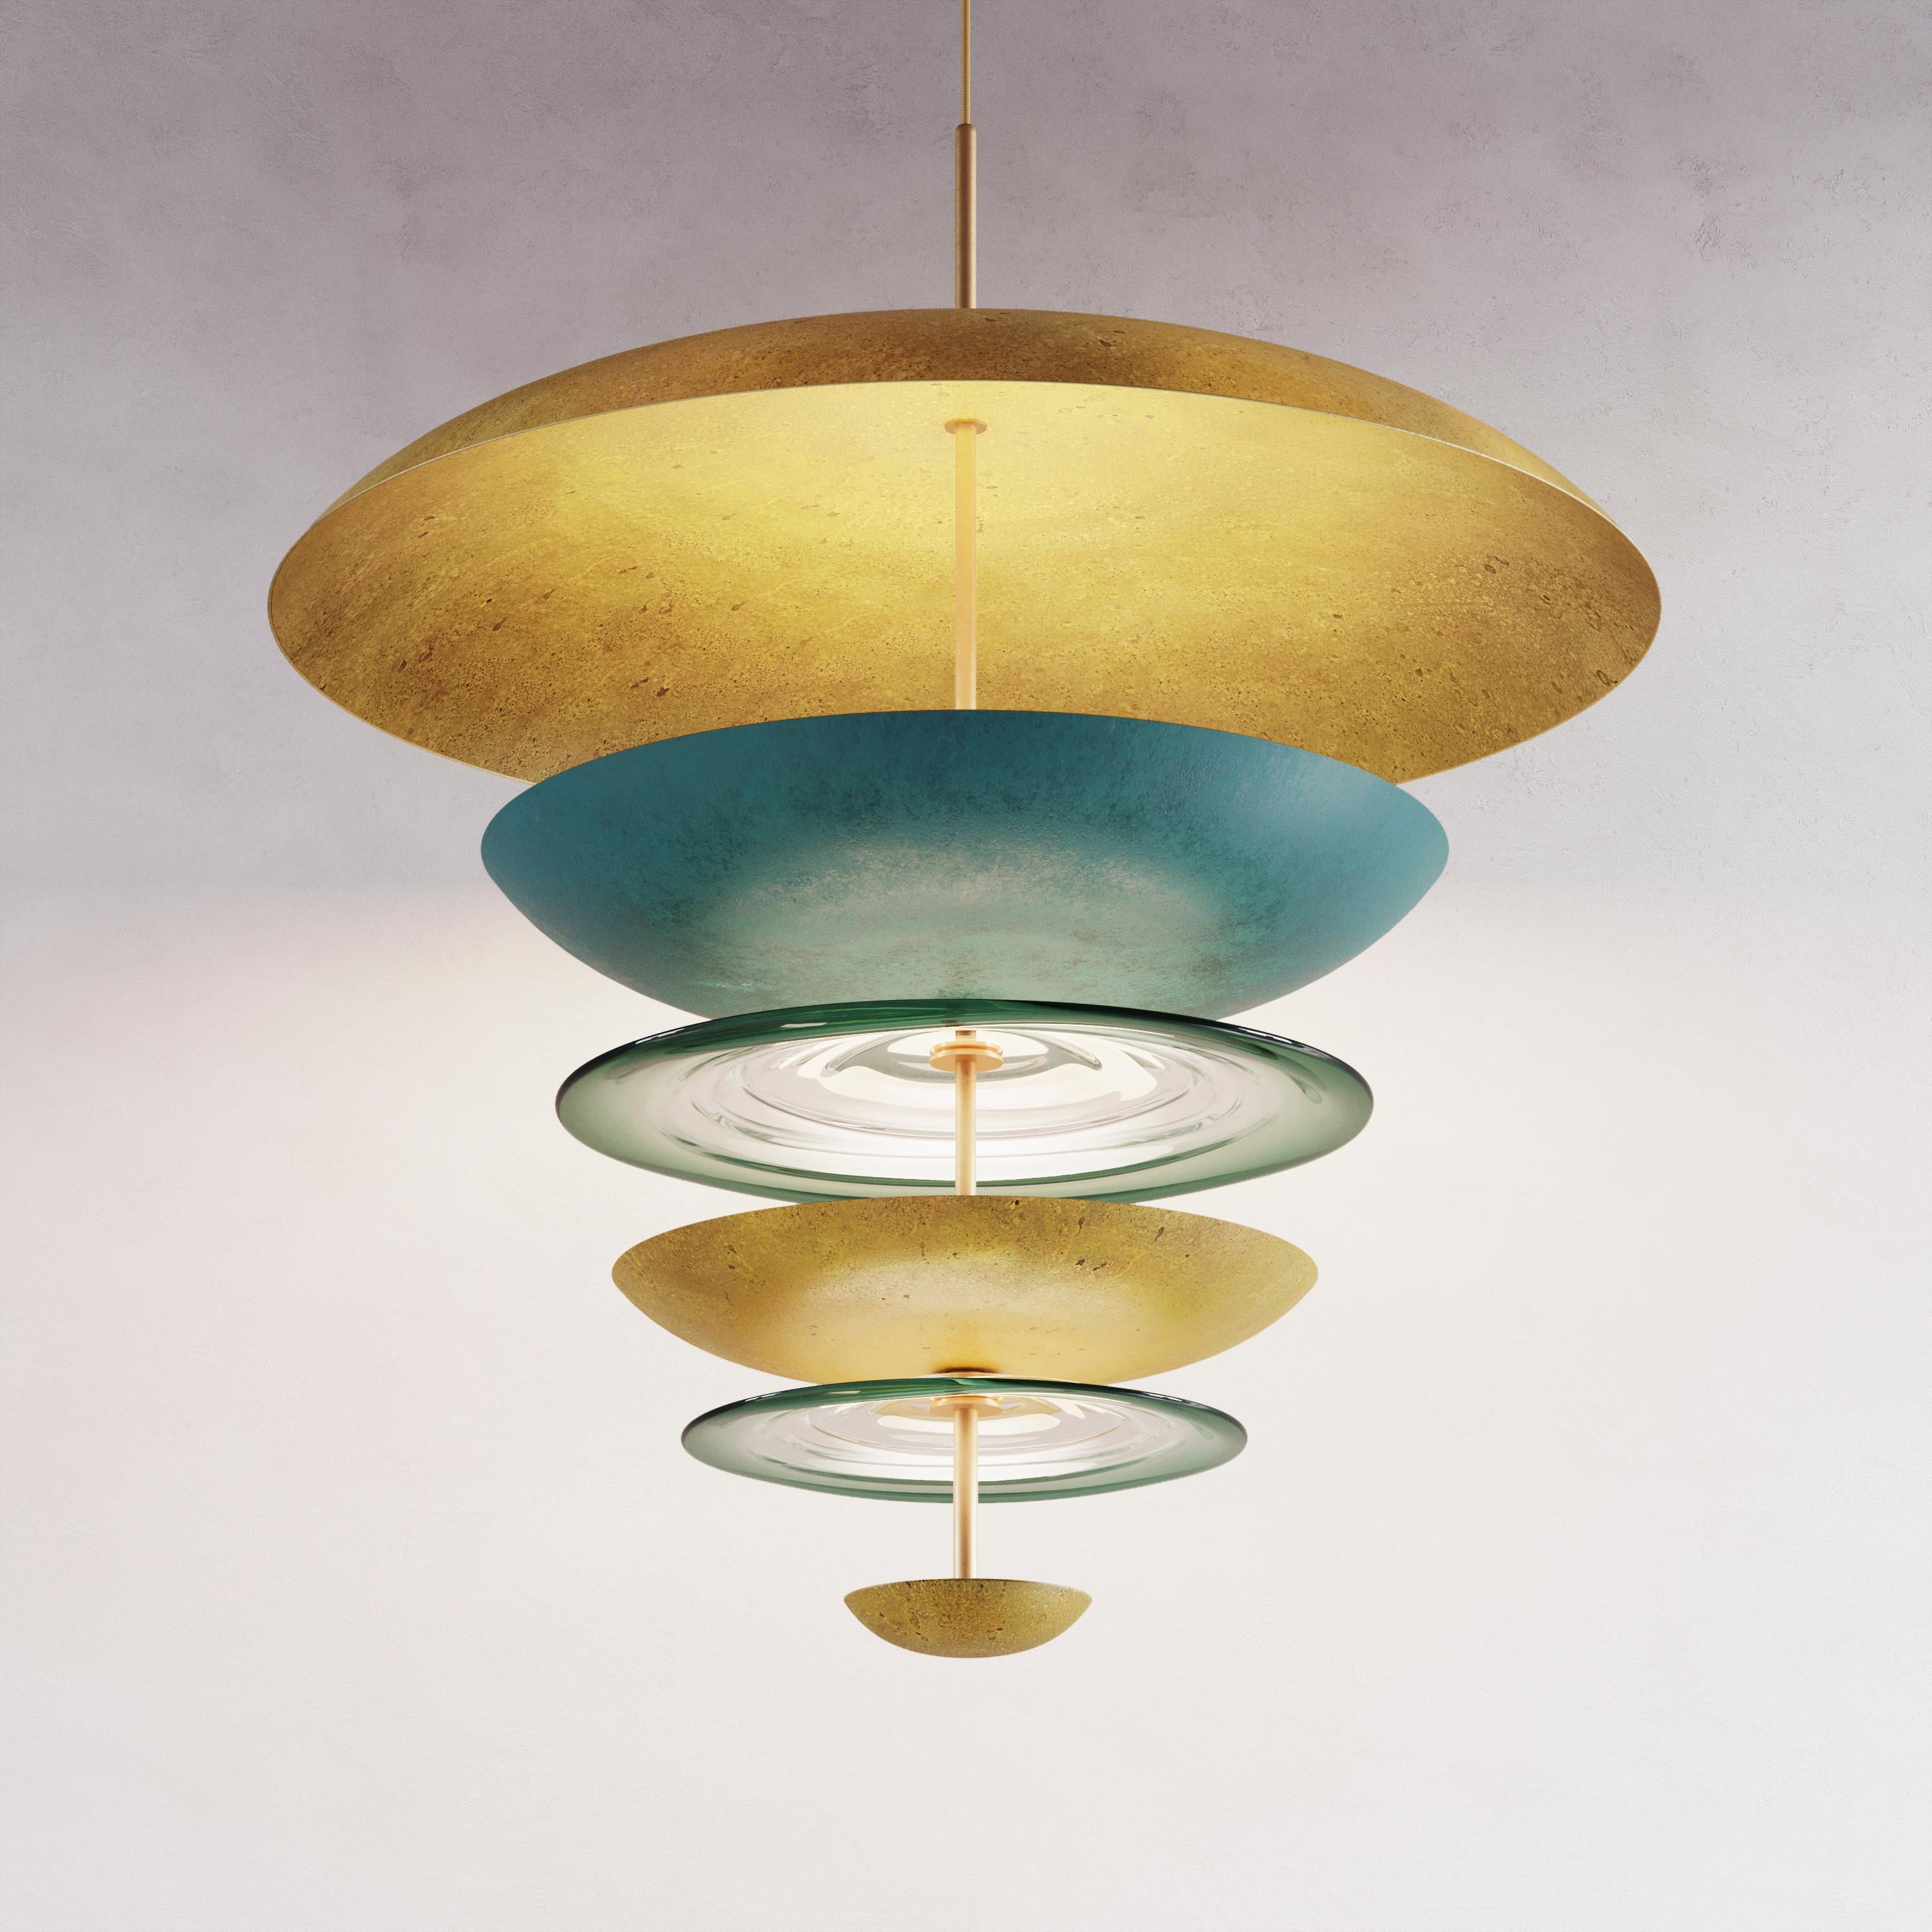 Inspired by the playfulness of a merry-go-round, the Carousel Chandeliers combine both of Atelier001’s signature collections, Cosmic and Liquid. Using hand-spun brass plates, hand-blown glass, and a selection of patinas, the Carousel pieces play